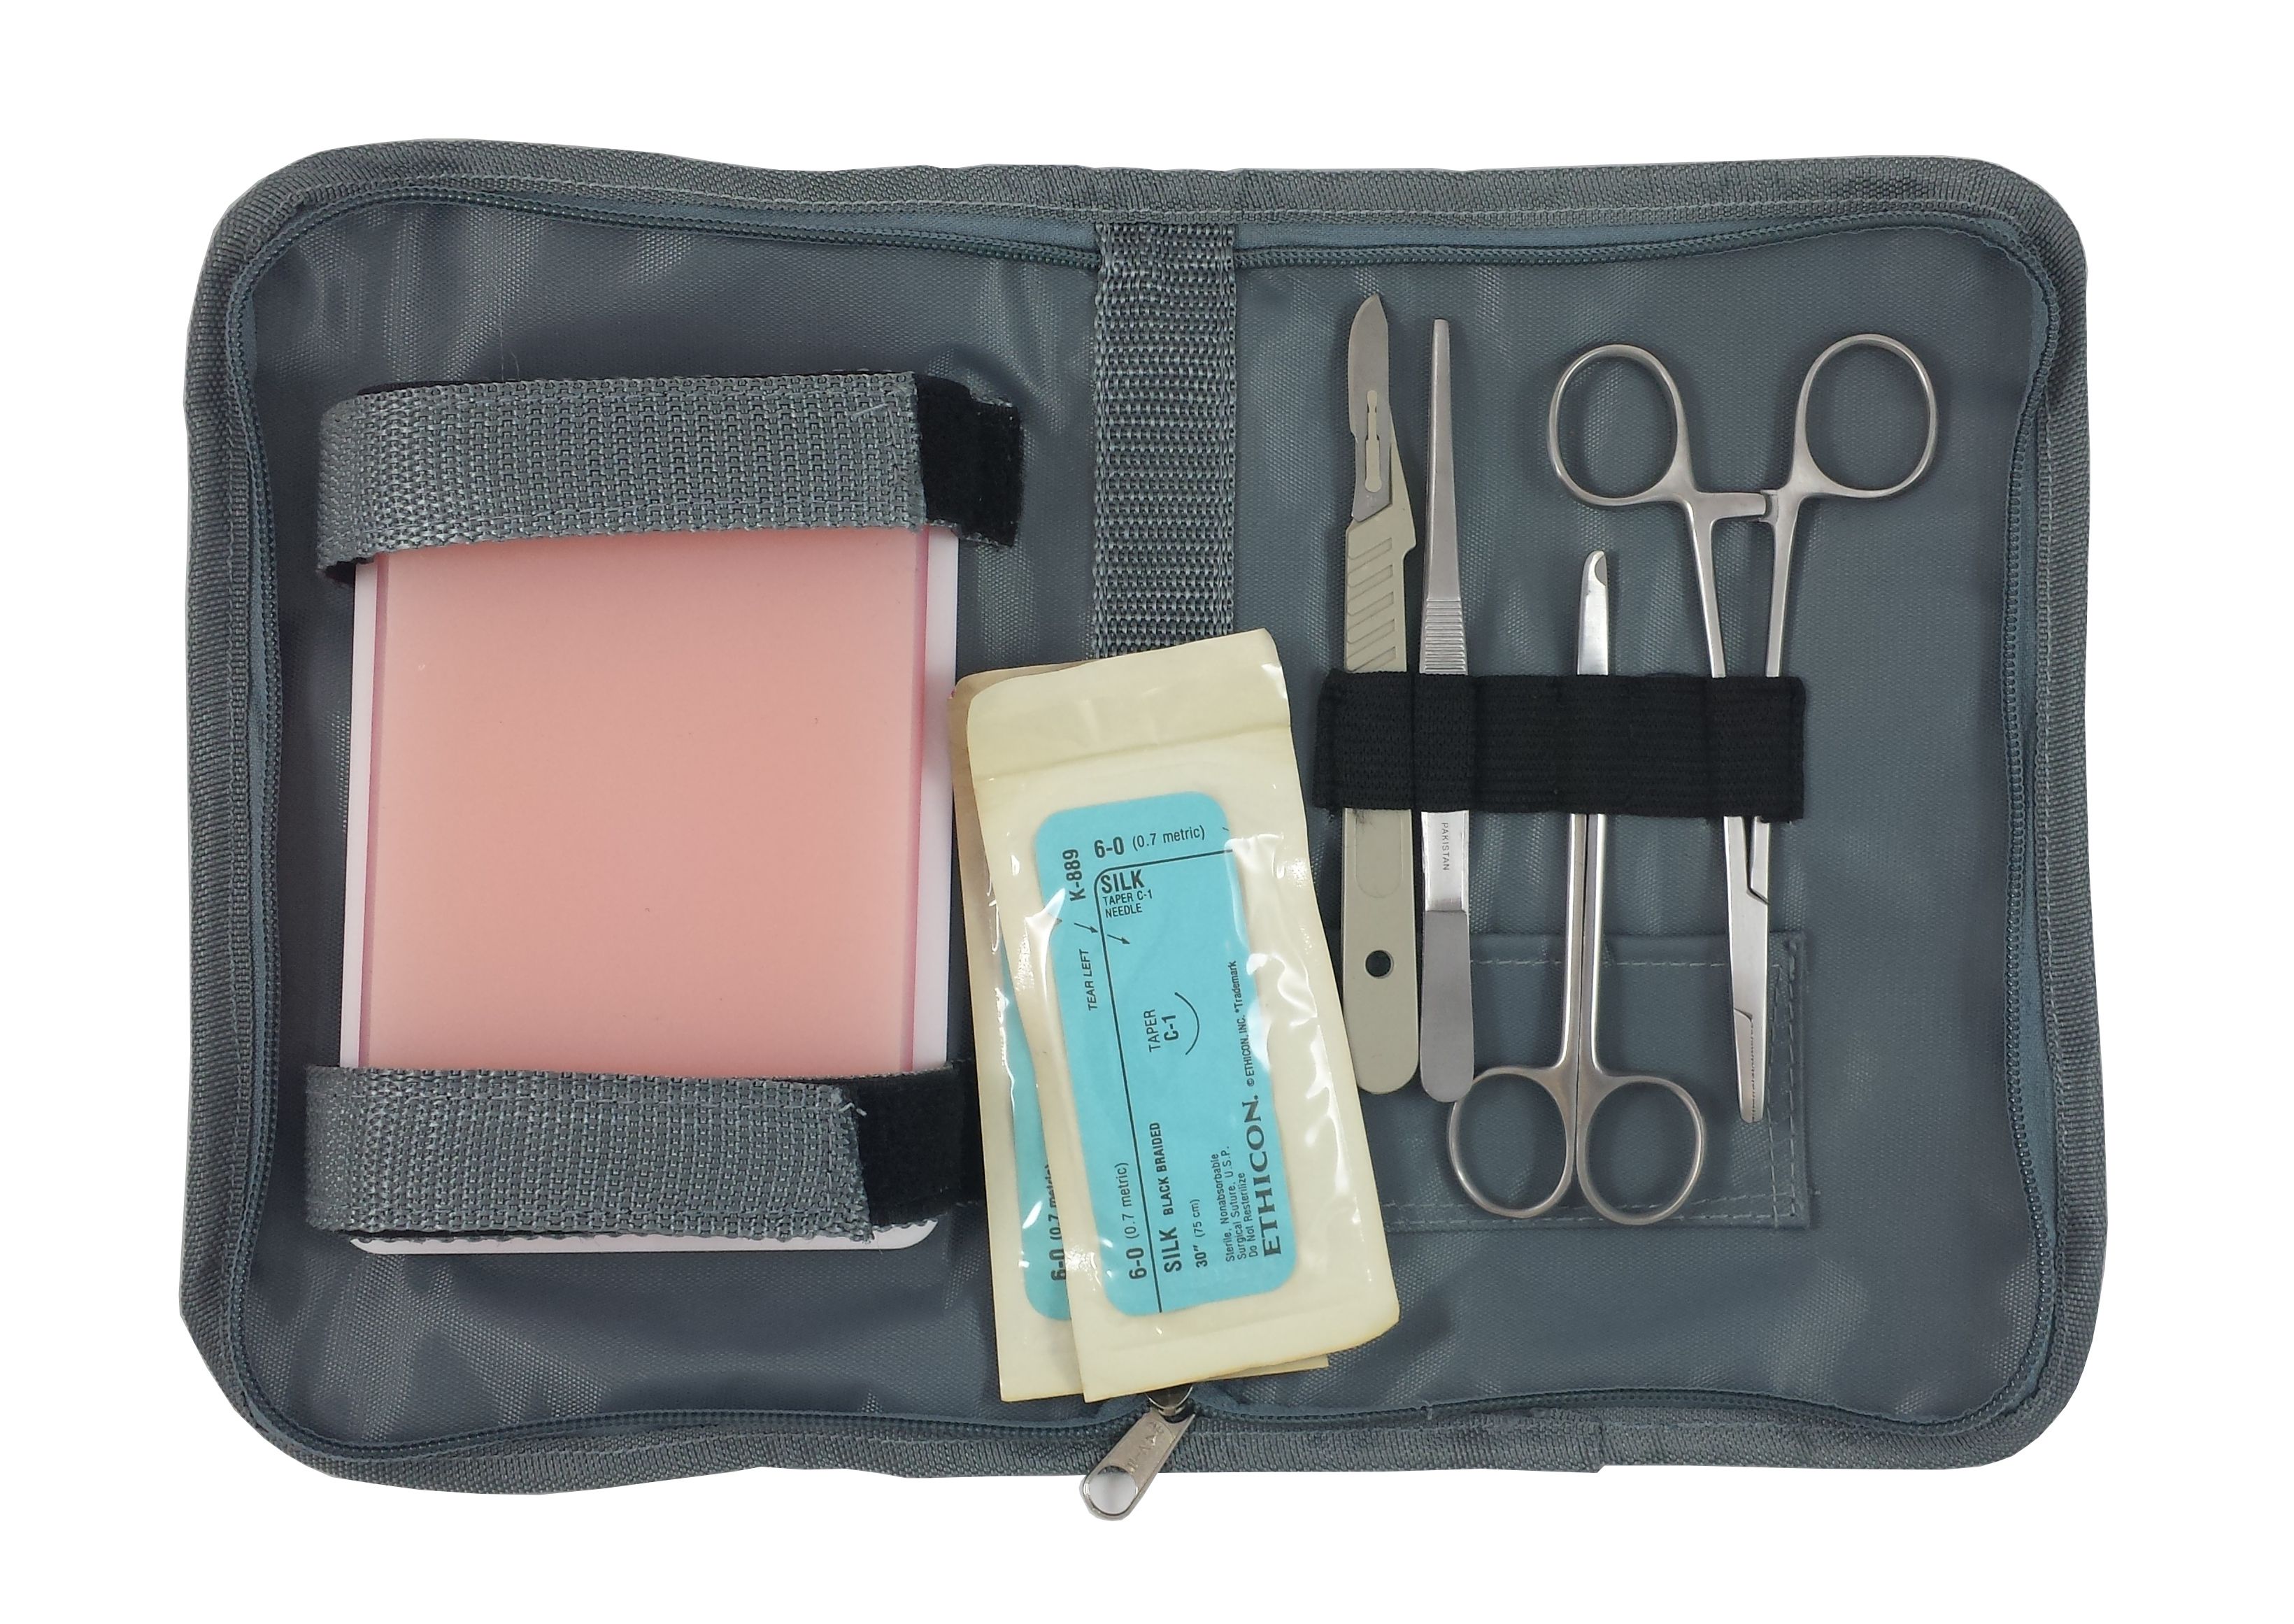 Advanced Surgical Suture Kit First Aid Medical Travel Trauma Pack